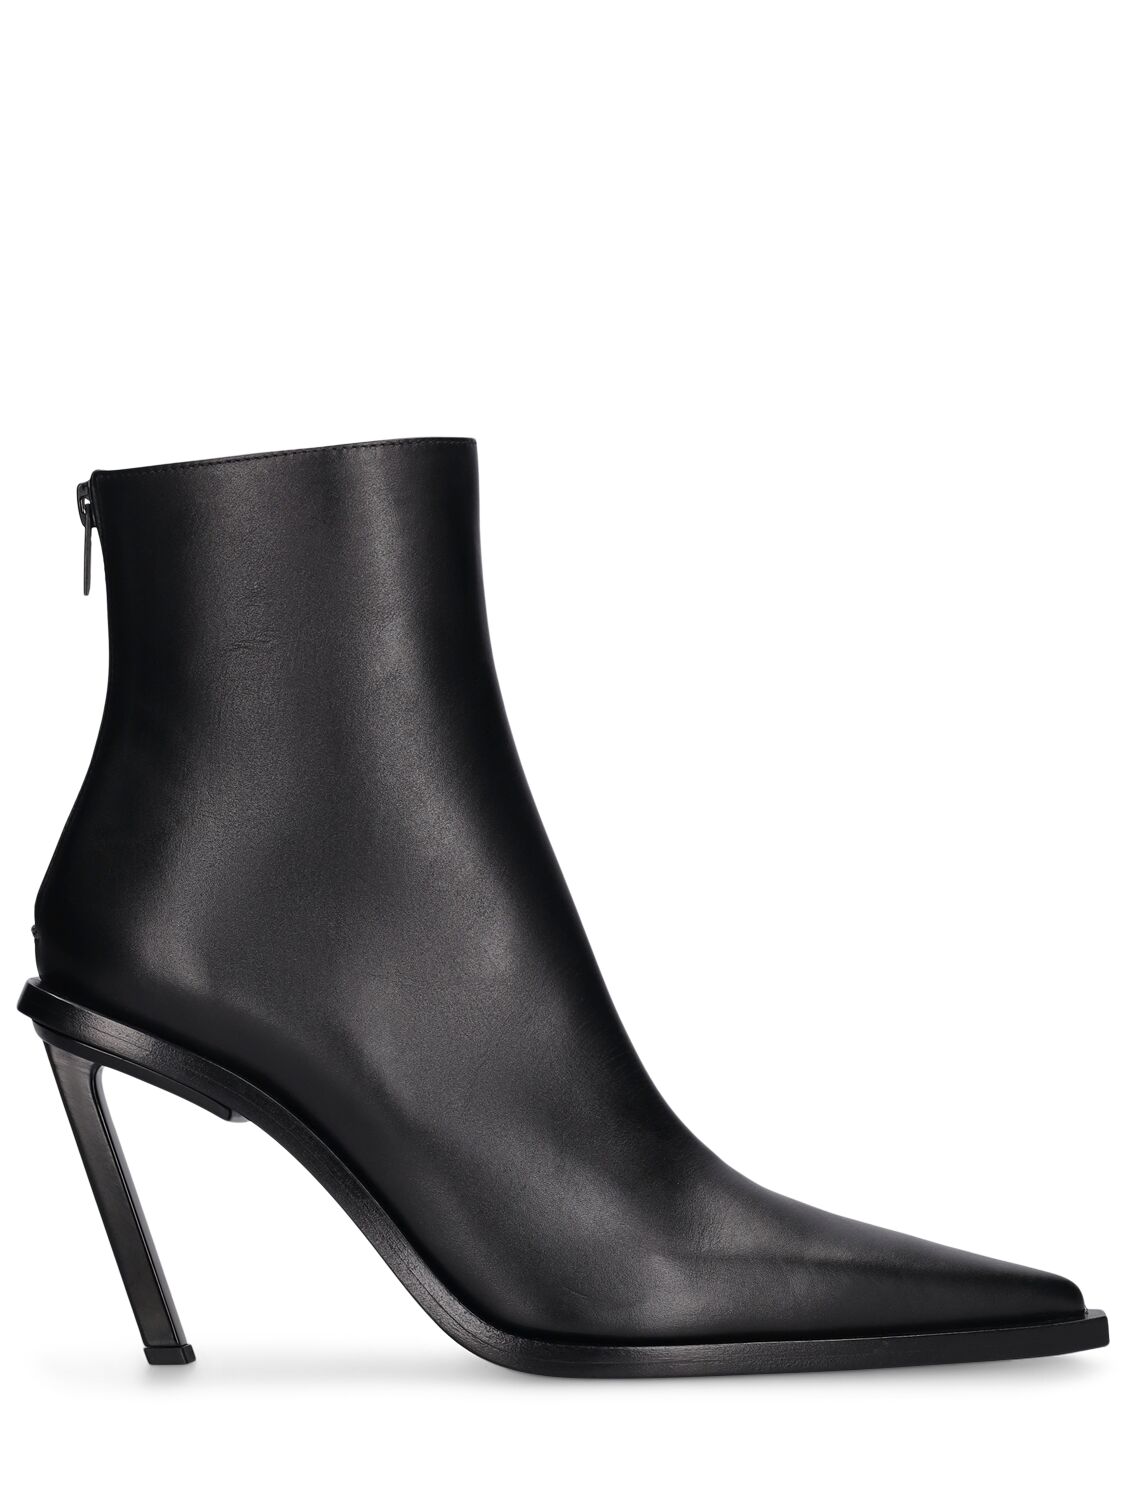 Ann Demeulemeester 90mm Anic High Heel Leather Ankle Boots In Black